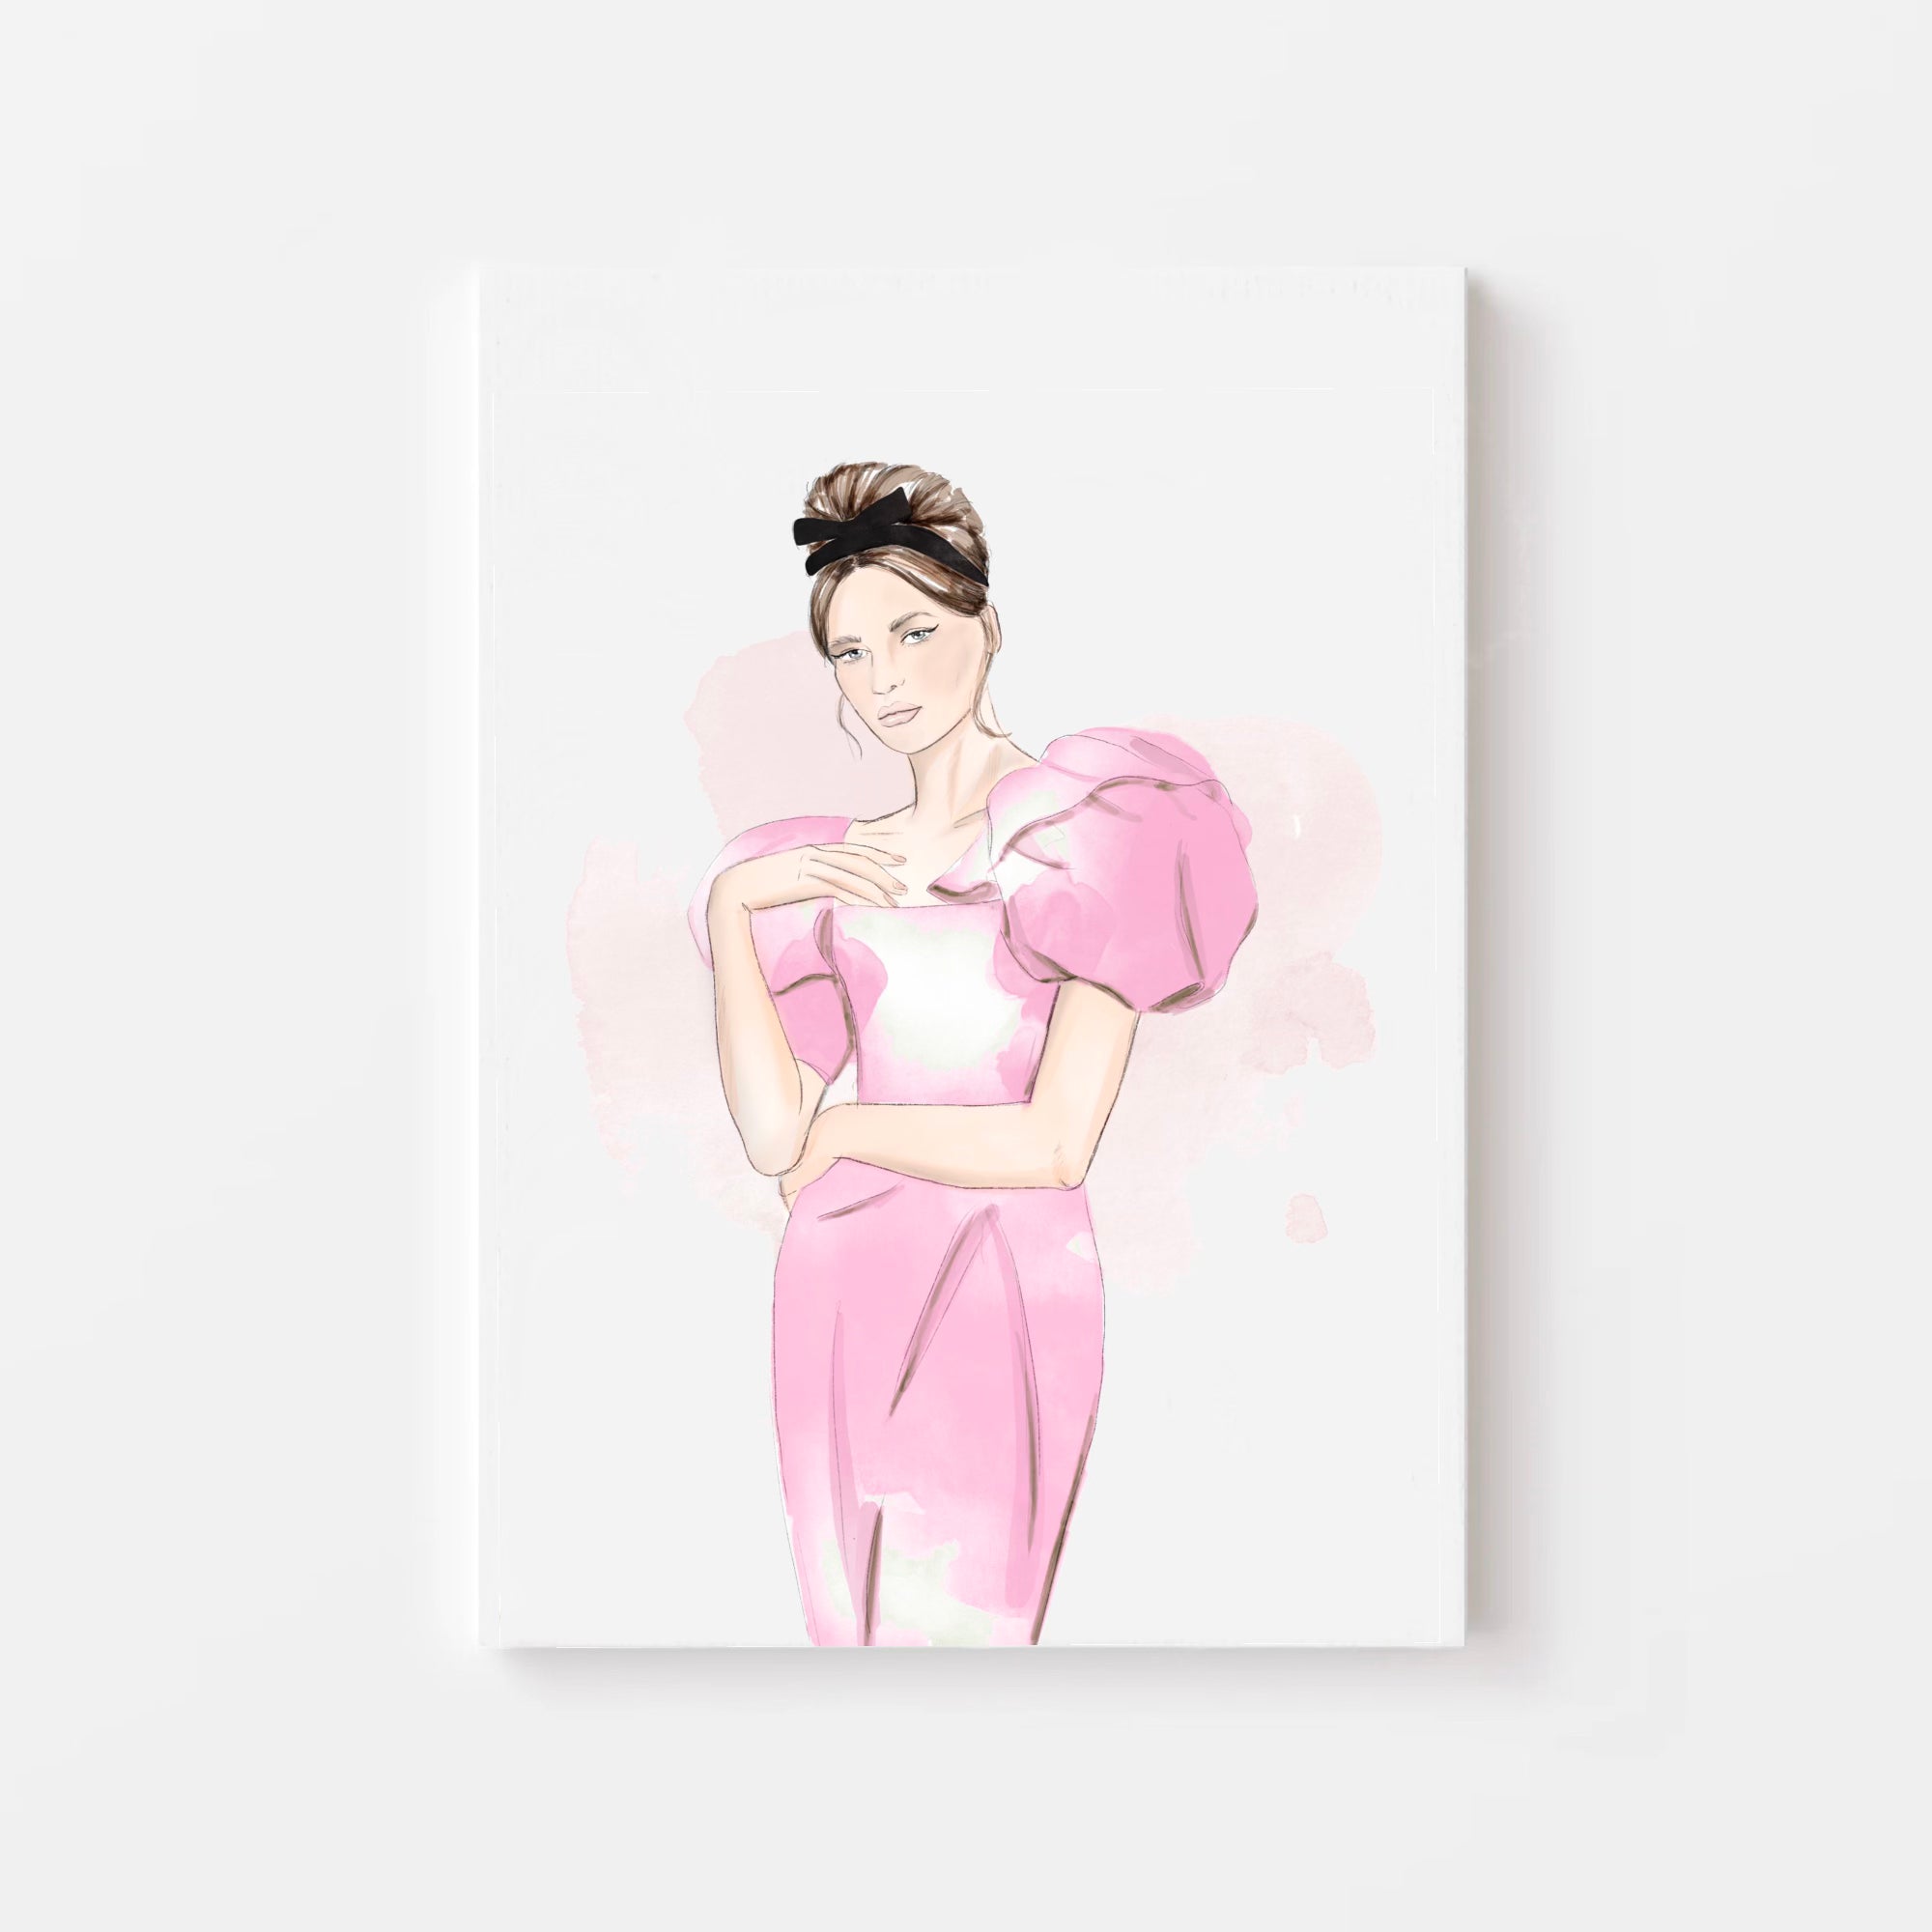 RetroVert Watercolor Art Print - with skin color, pink dress